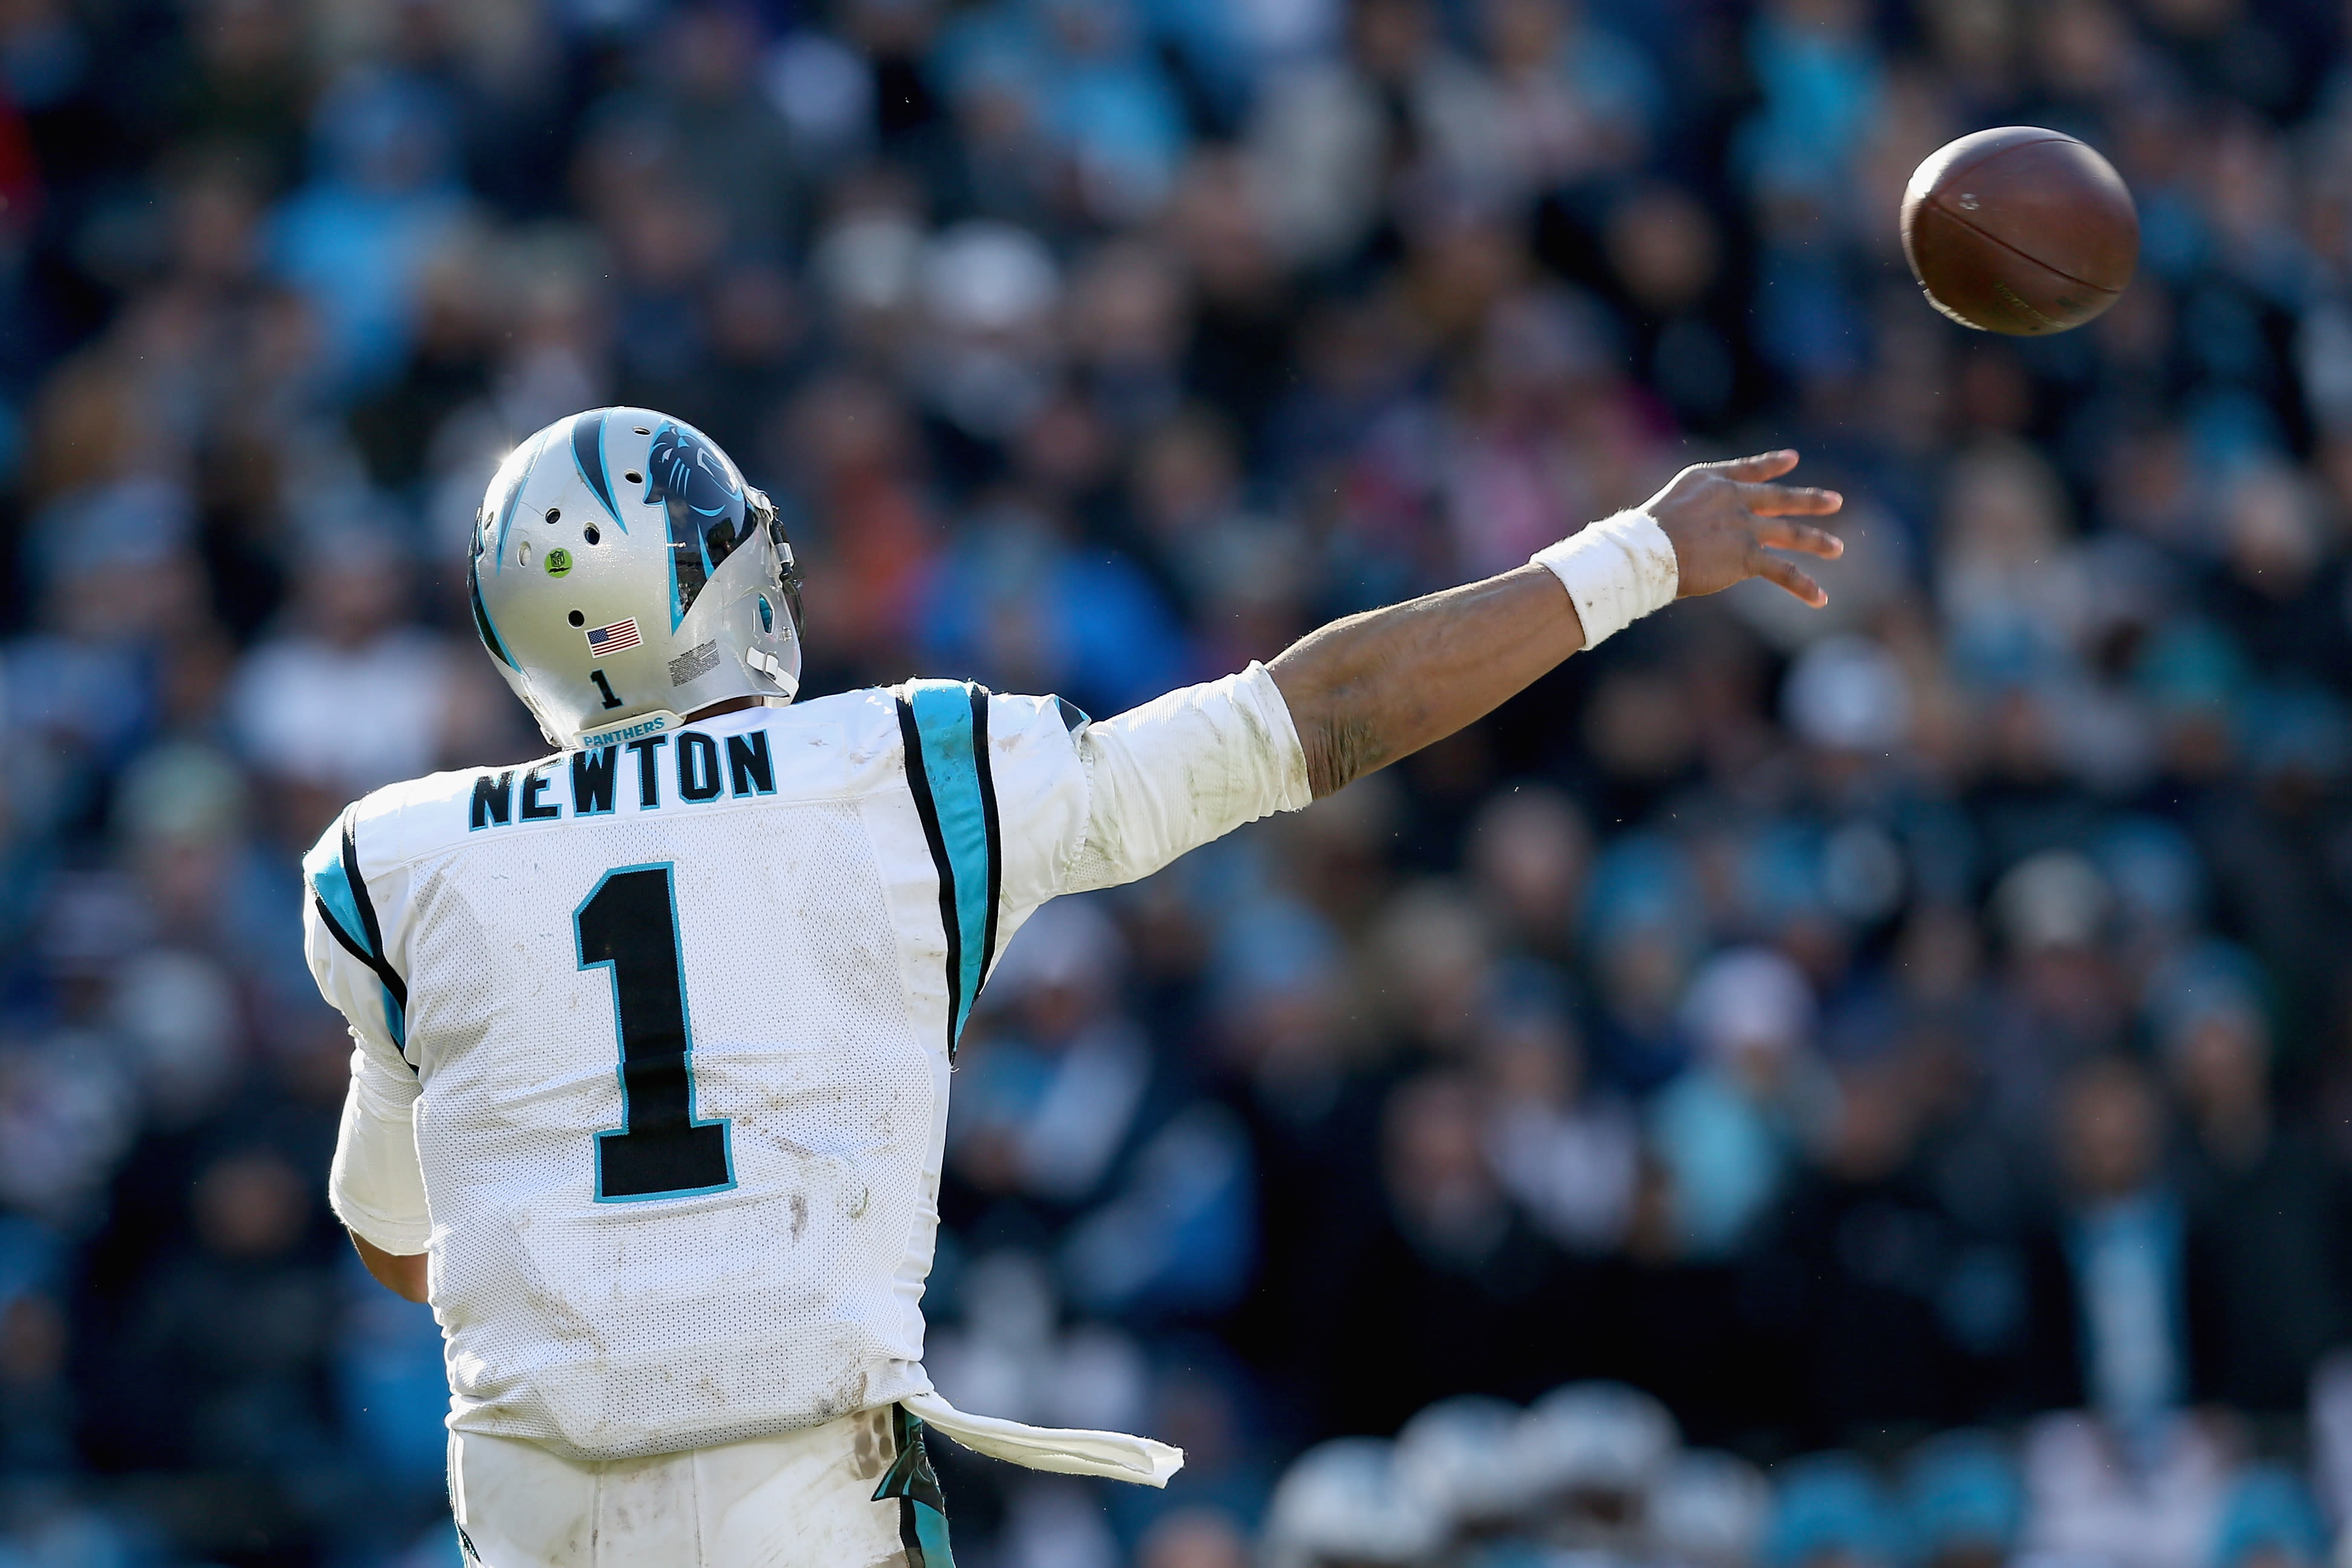 Cam Newton Says Game Performance 'Hasn't Been Good' Lately